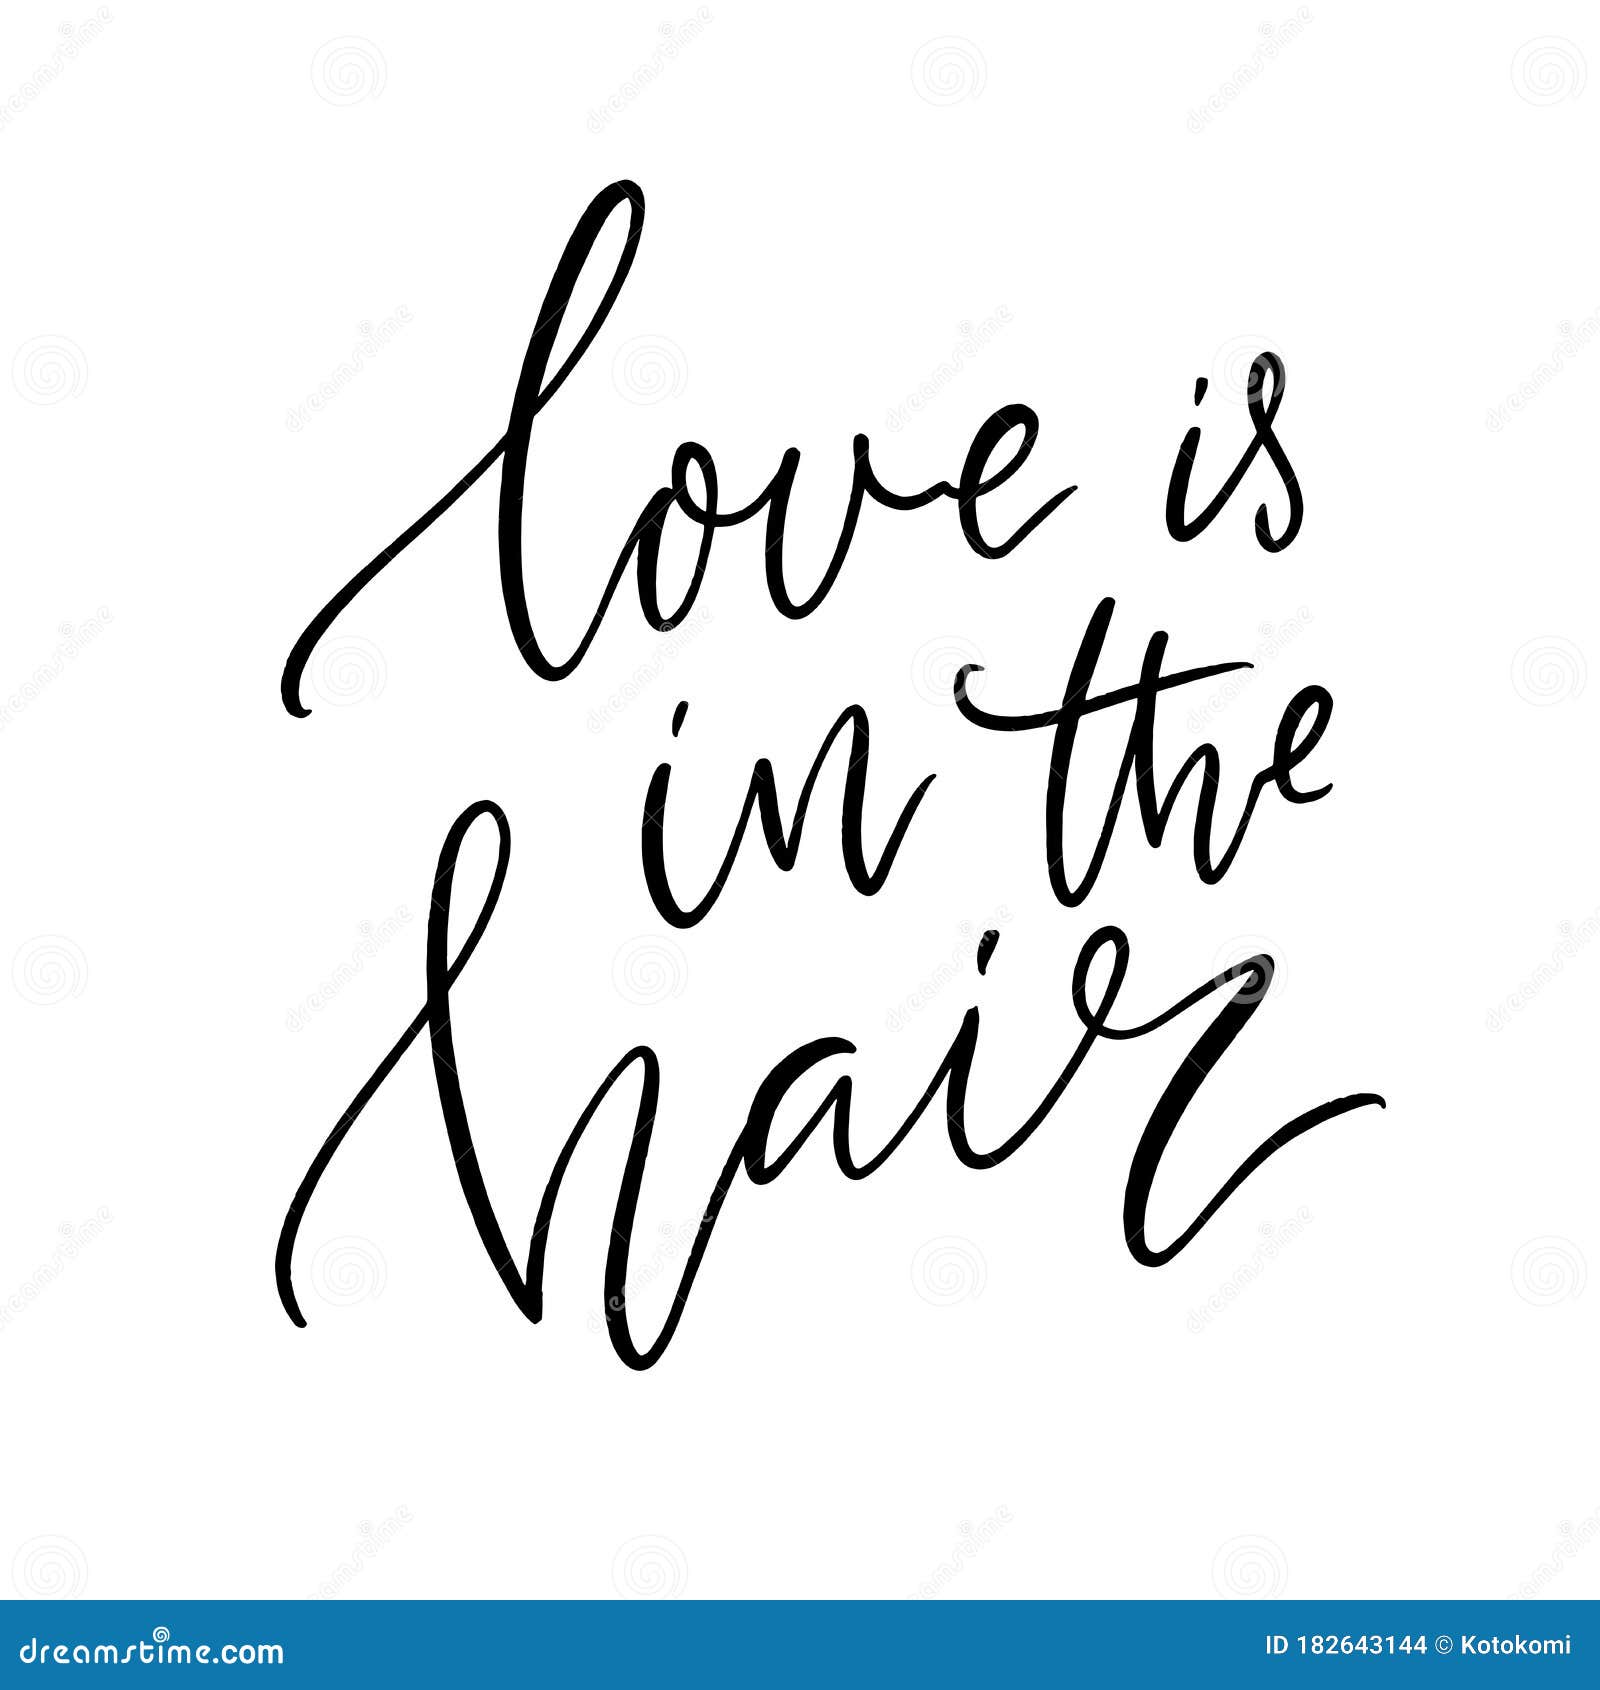 Love is in the Air | Hair salon quotes, Hairstylist quotes, Hair quotes